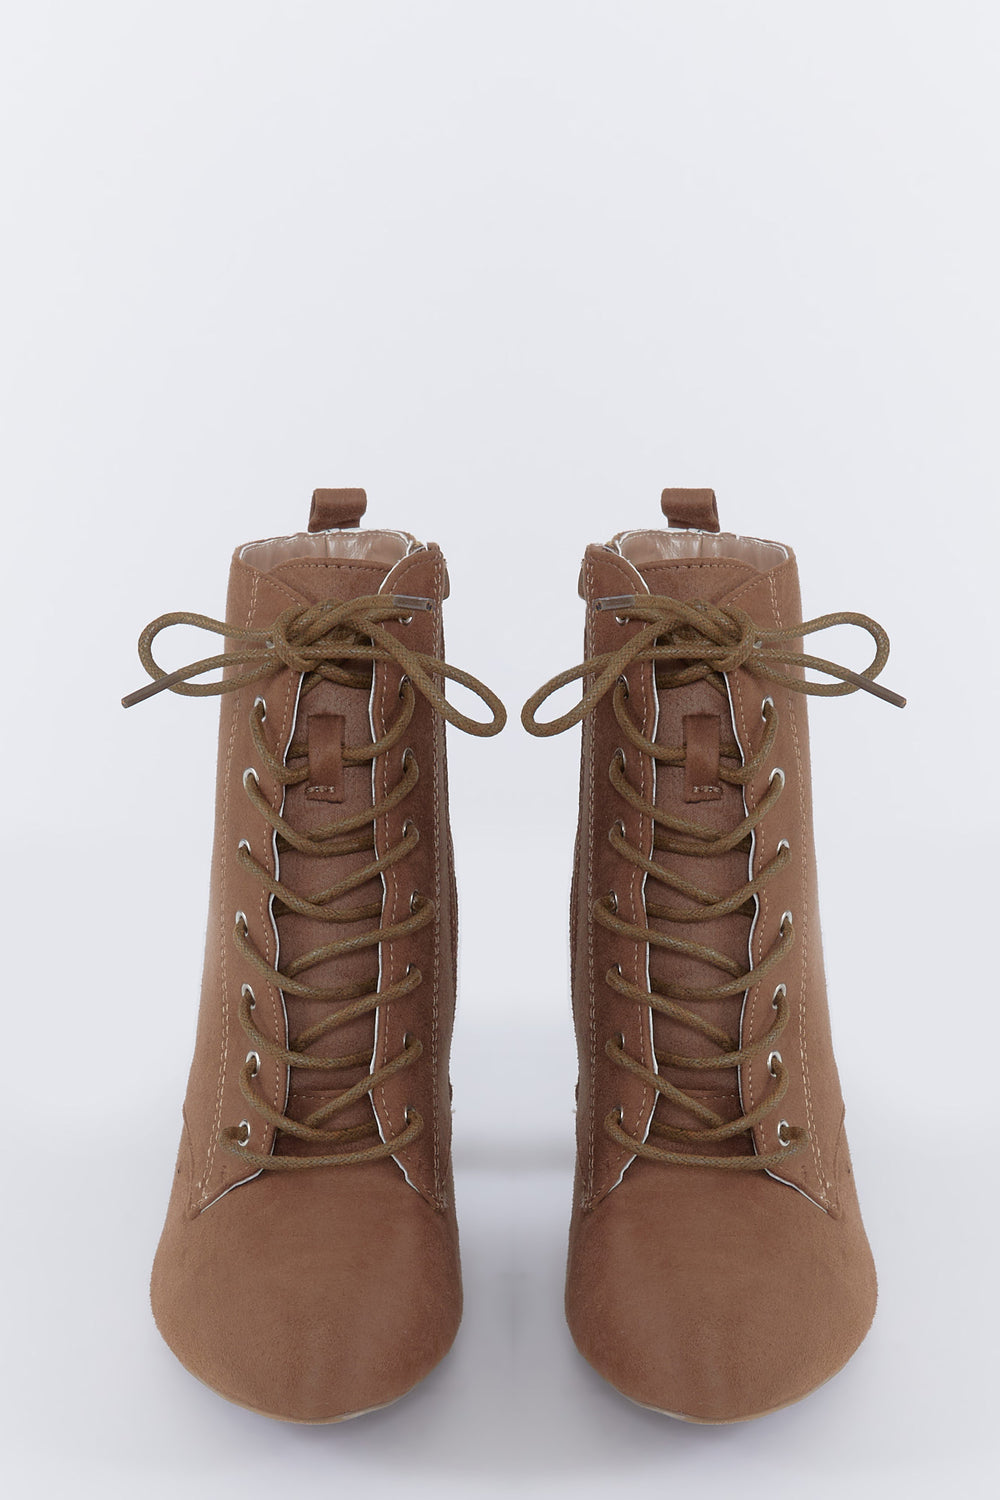 Faux-Suede Lace-Up High Heel Boot Brown